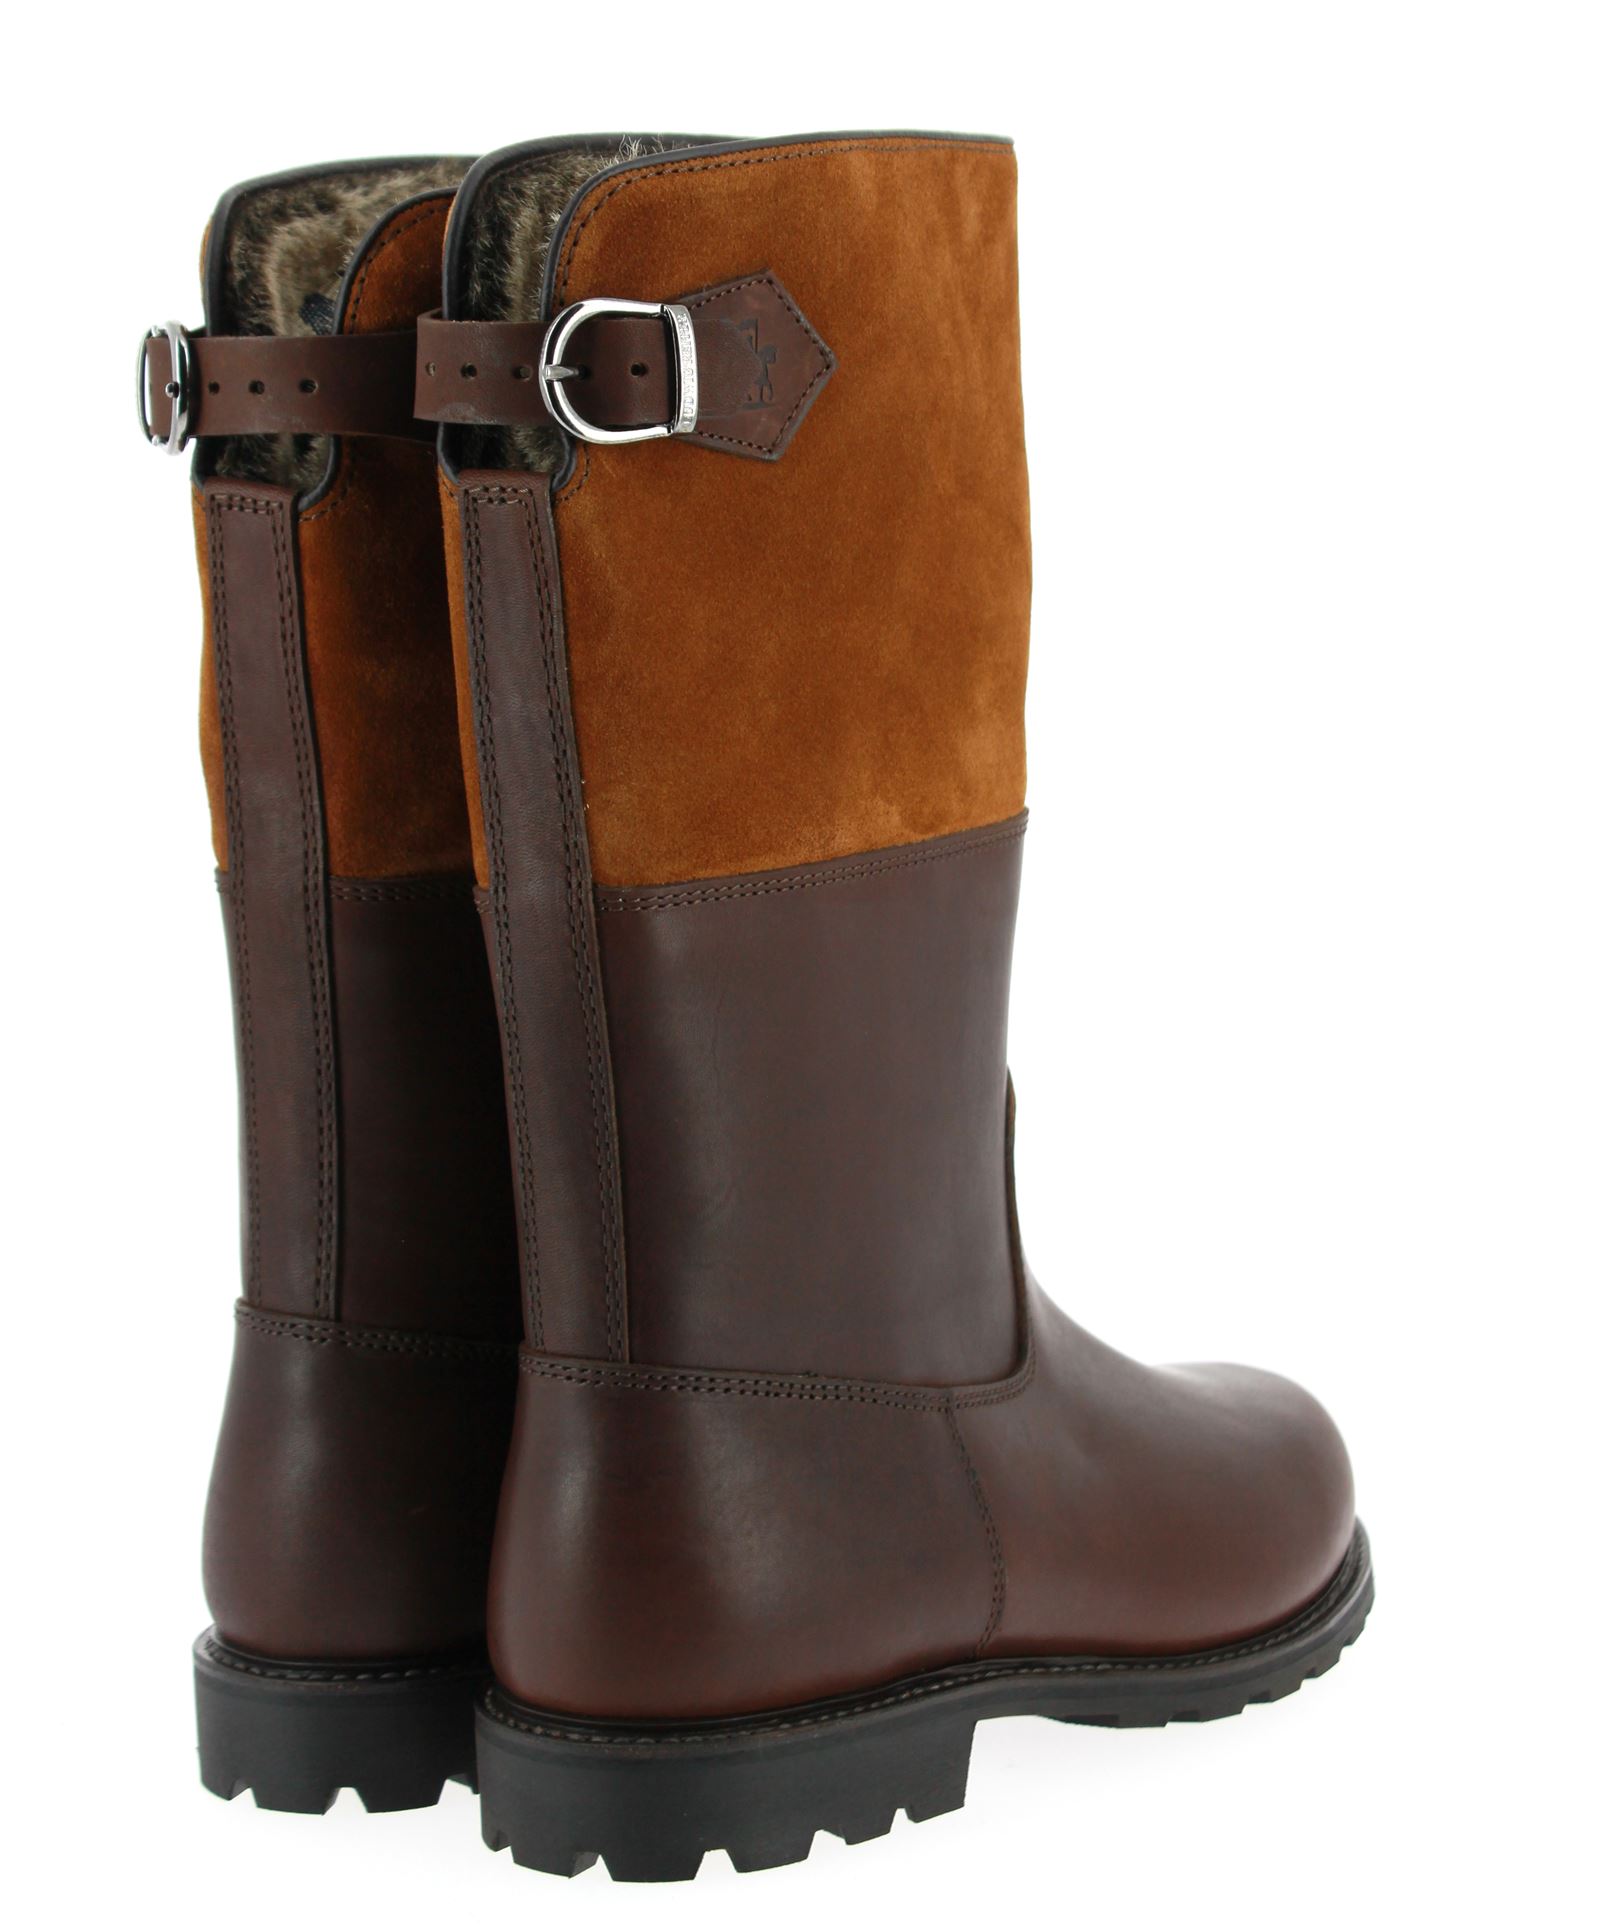 Ludwig Reiter Stiefel MARONIBRATER VELOURS COGNAC (43)